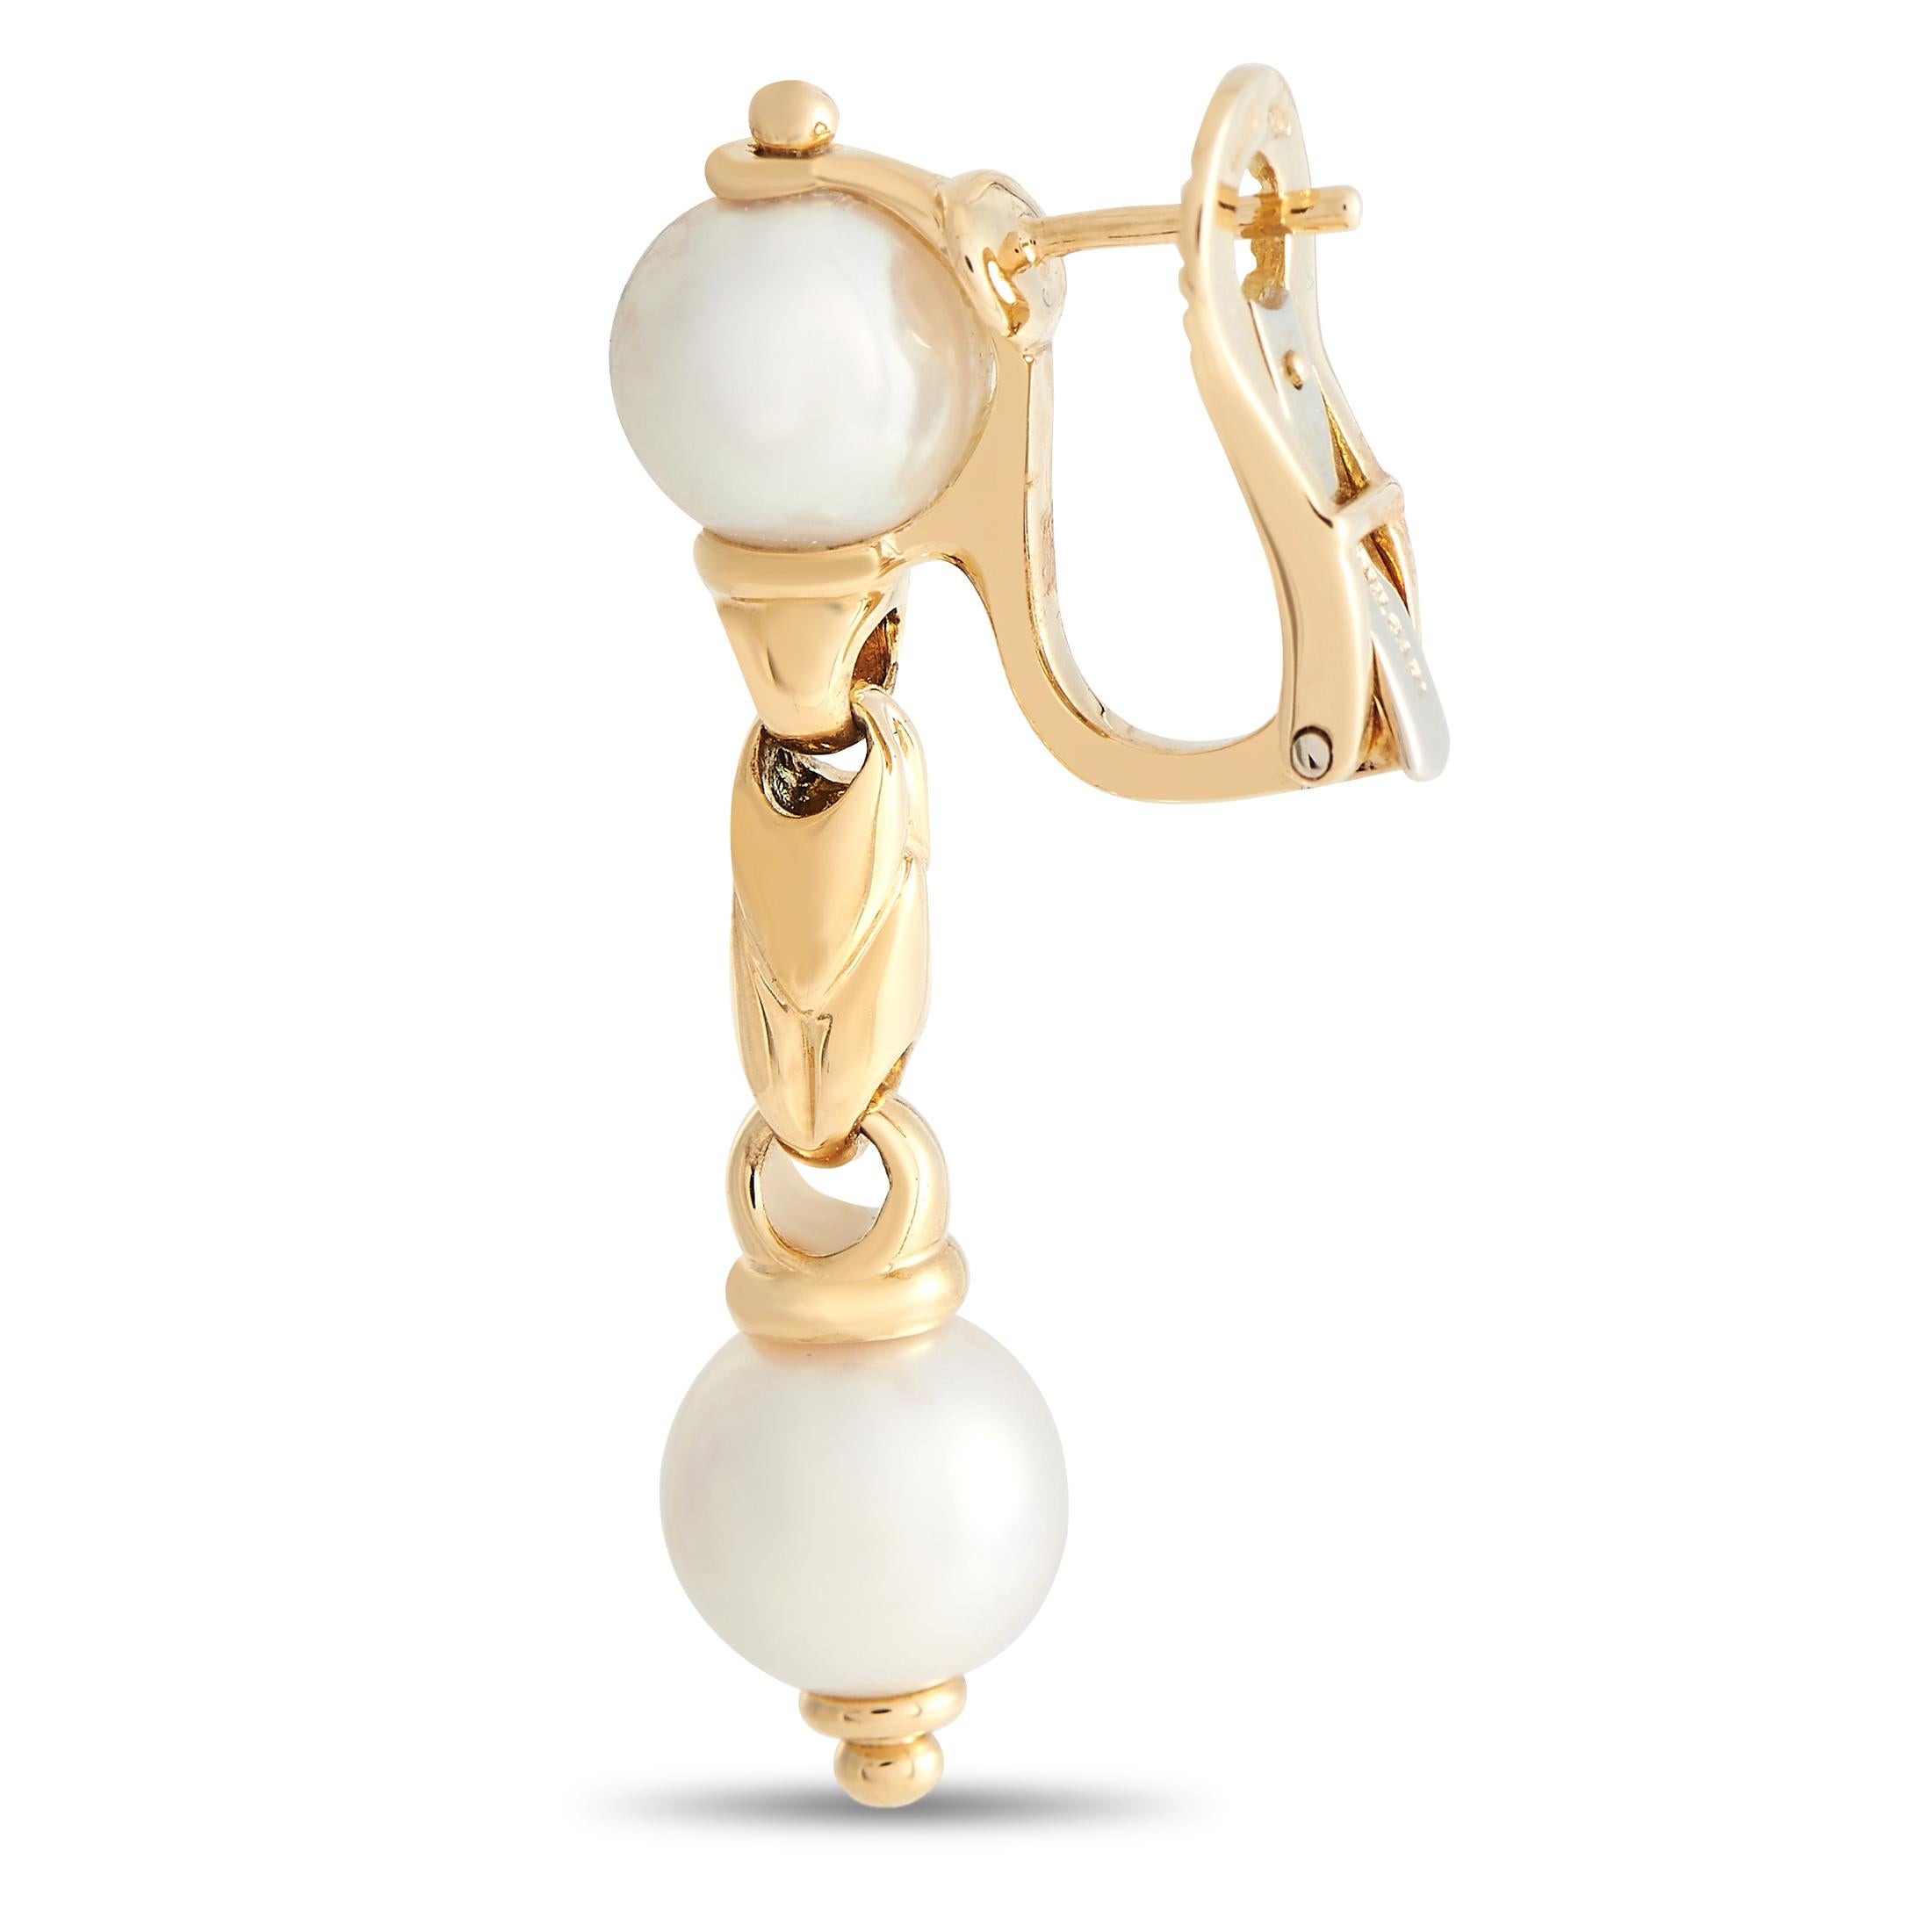 A sleek 18K Yellow Gold setting is elevated by opulent Pearl accents on these impressive Bvlgari Passo Doppio earrings. Chic and incredibly elegant, each one measures 1.5” long and 0.31” wide. 
 
 This jewelry piece is offered in estate condition